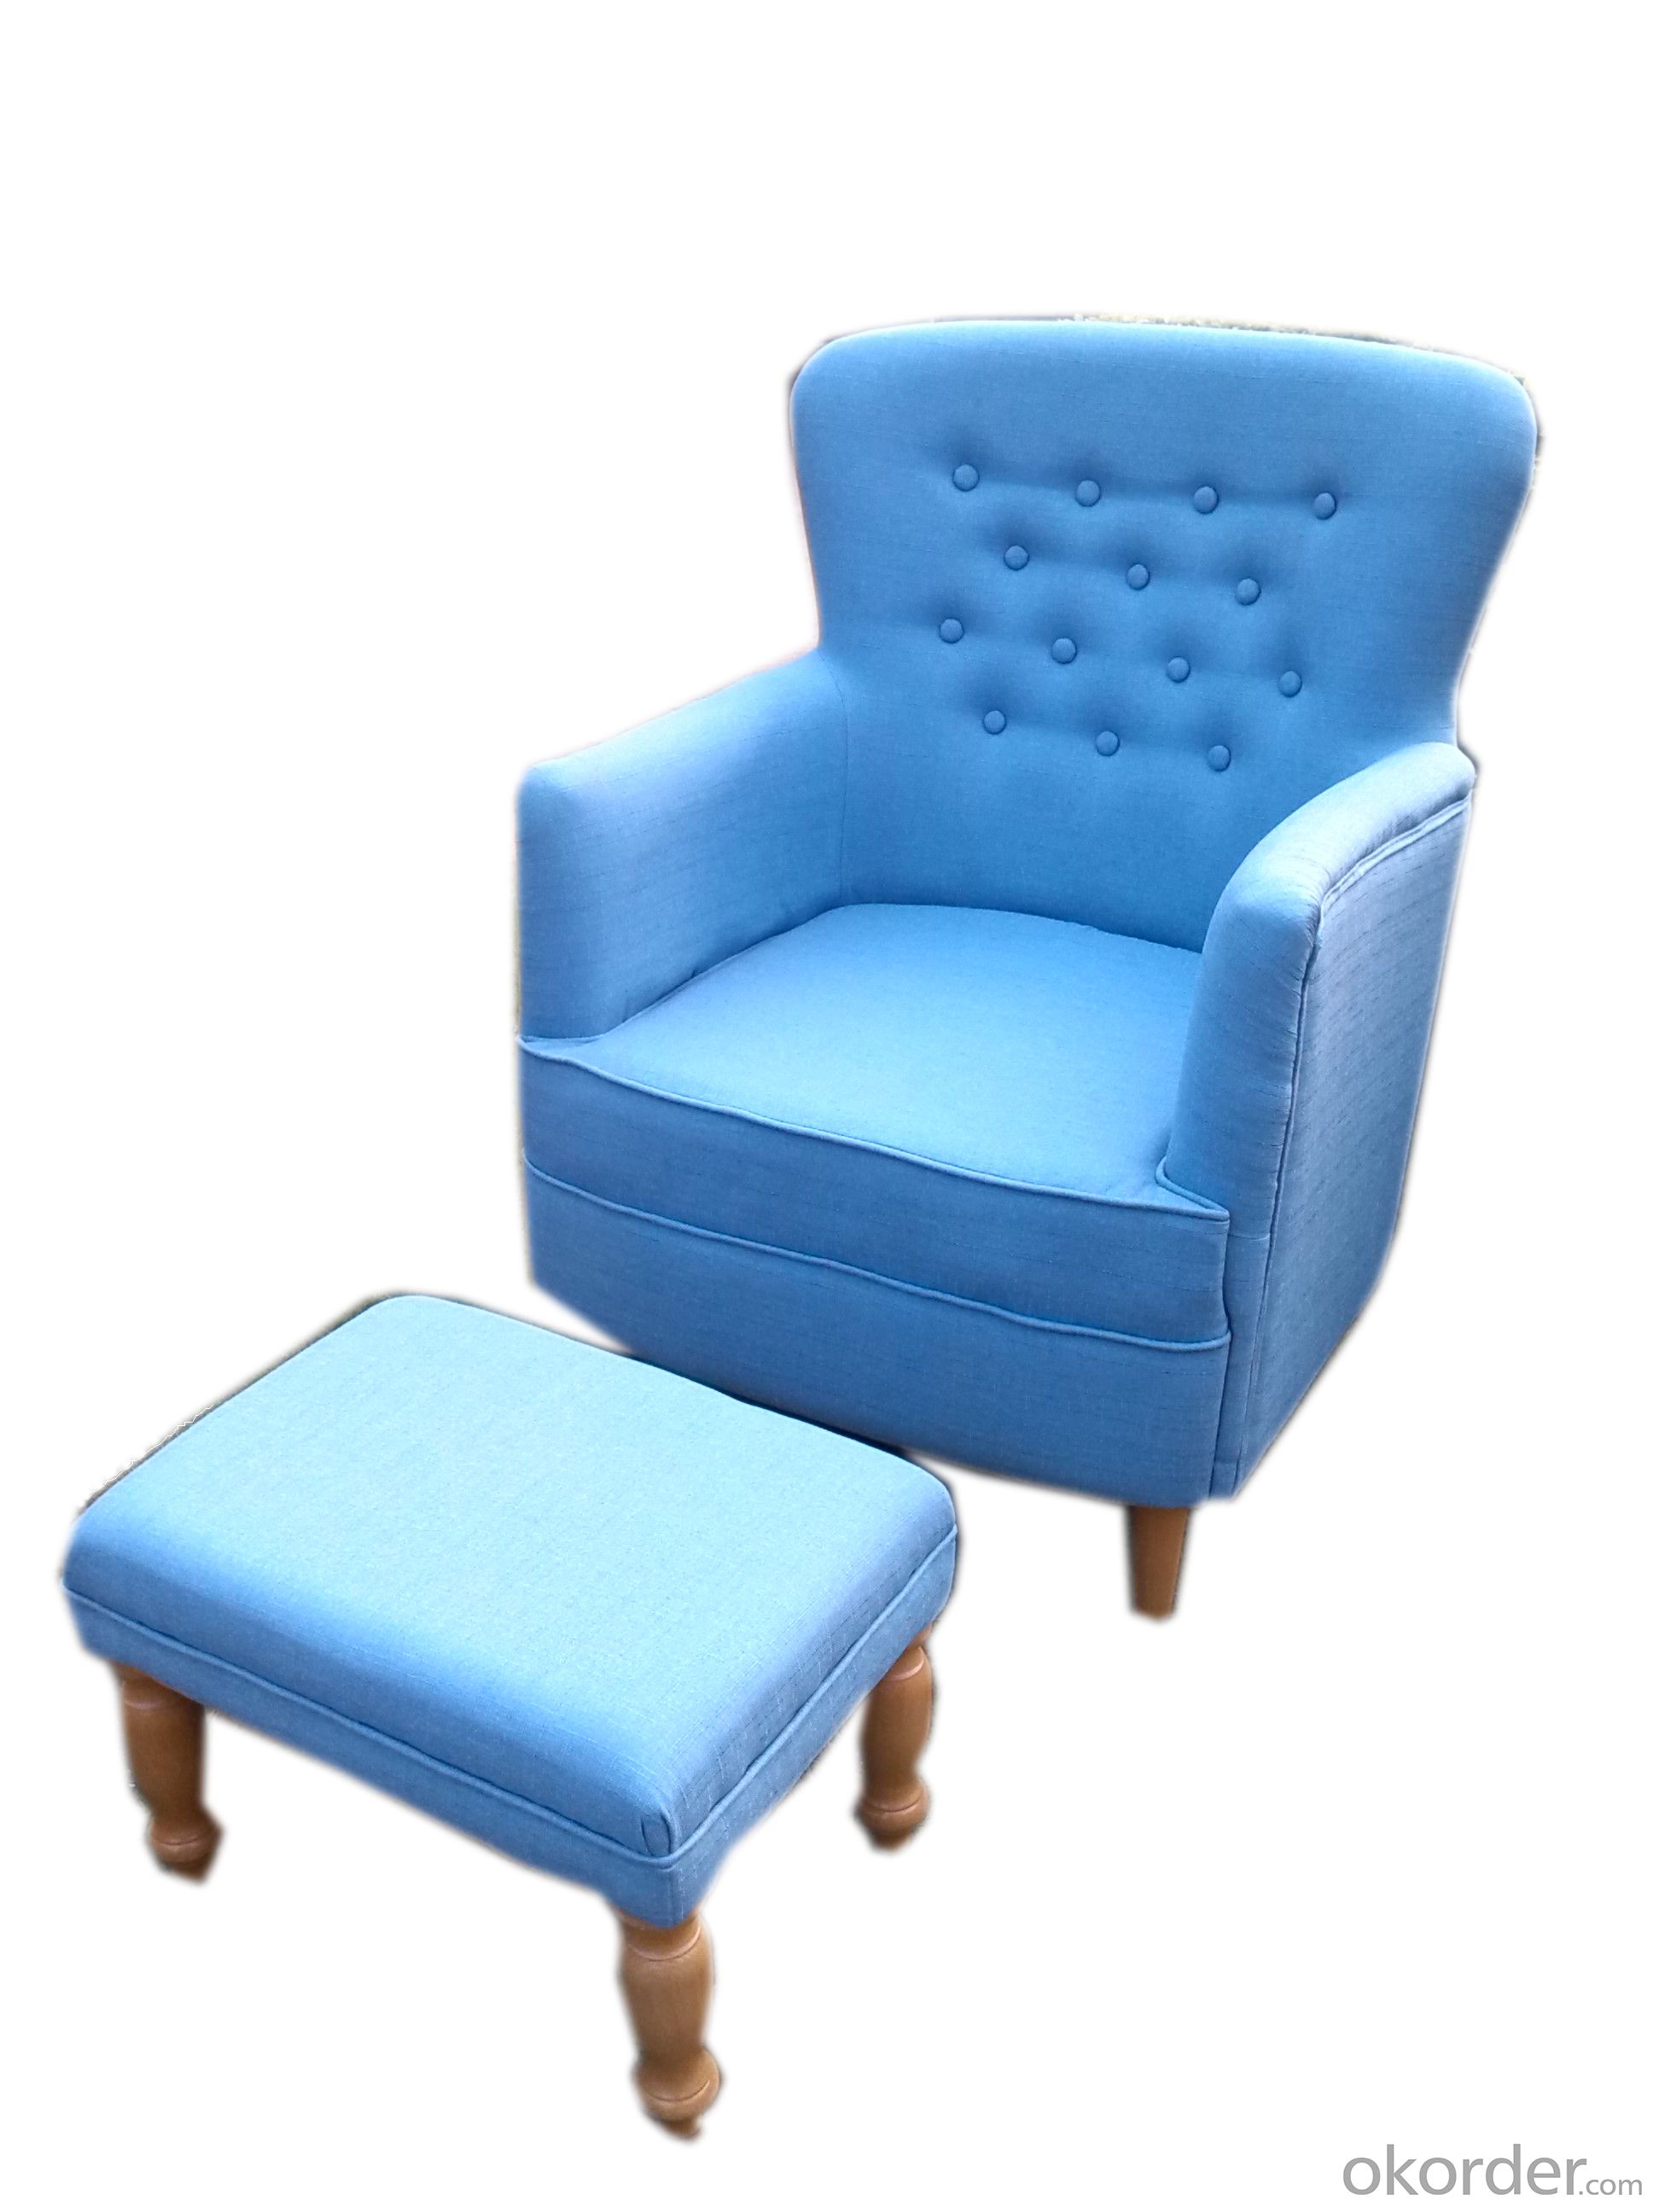 Modern style sofa chair with ottoman,living room chair